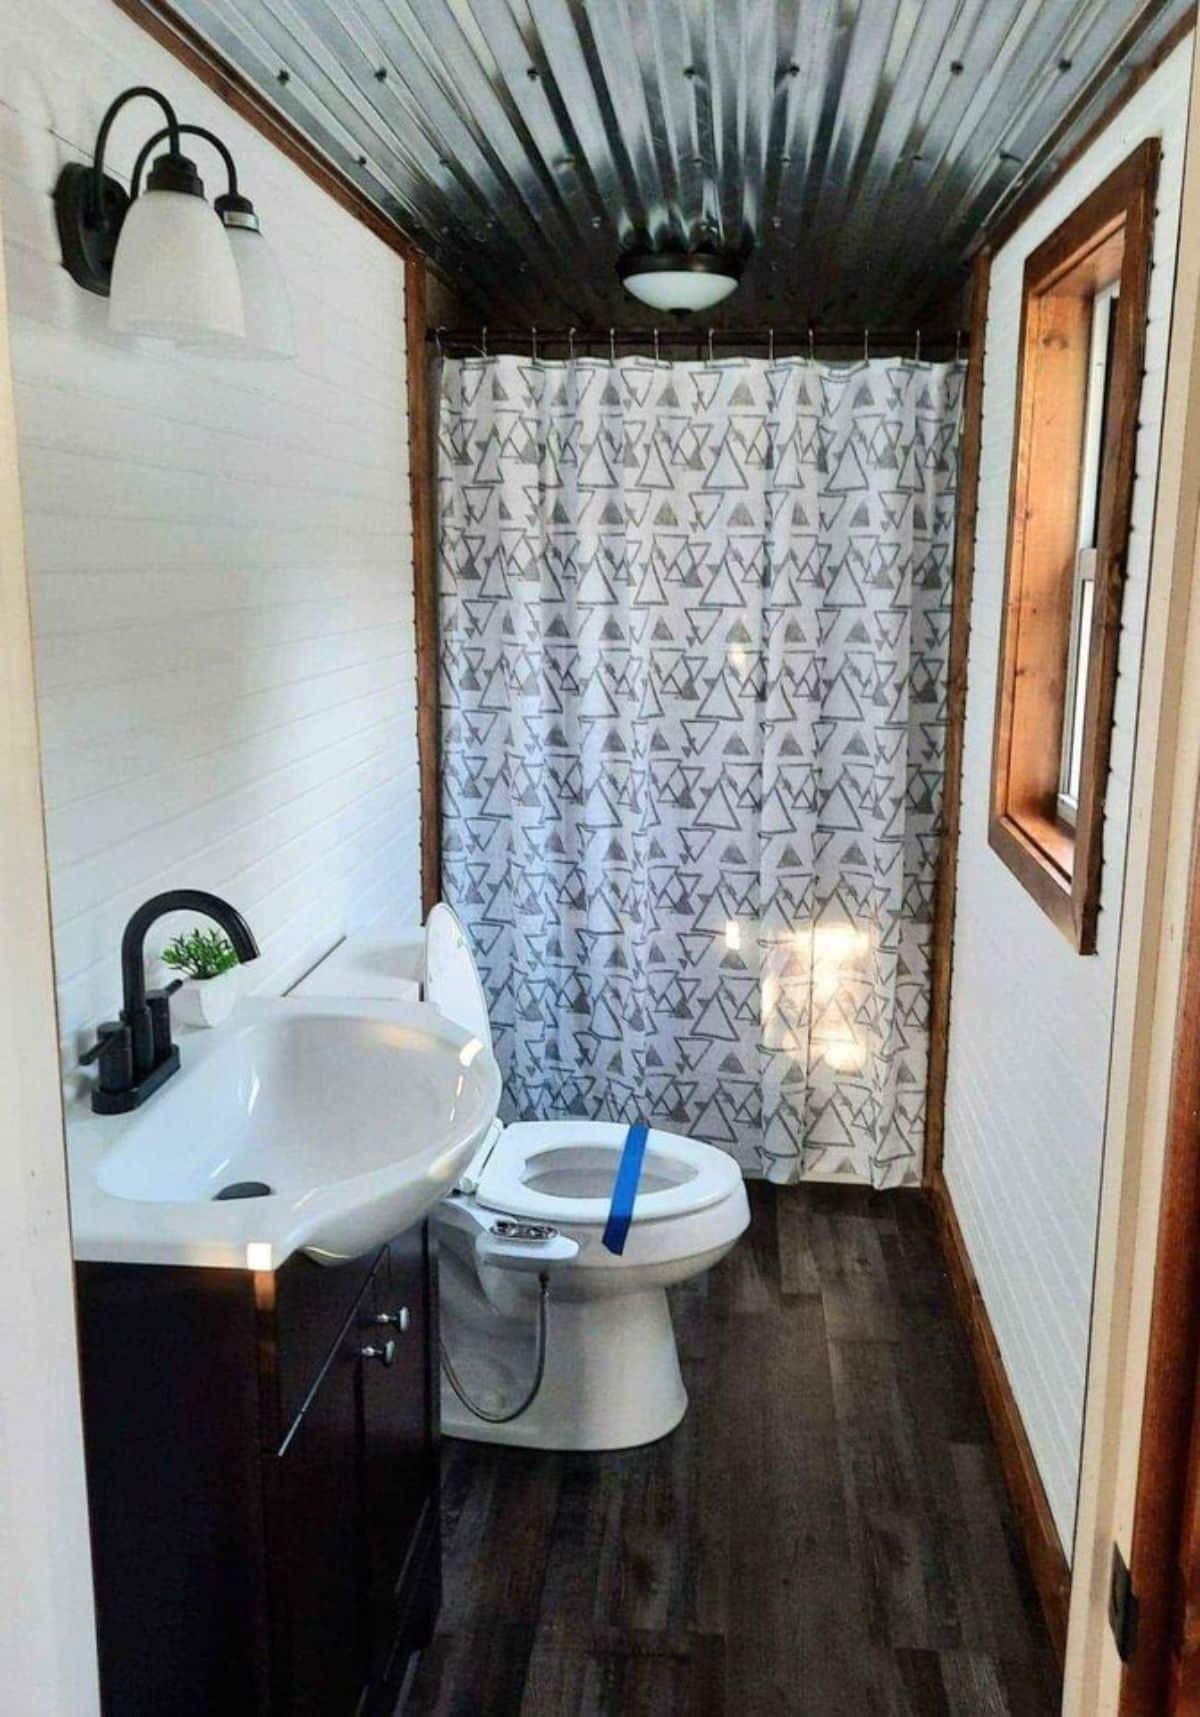 Sink with vanity and standard toilet in bathroom of 24’ Tiny Cabin